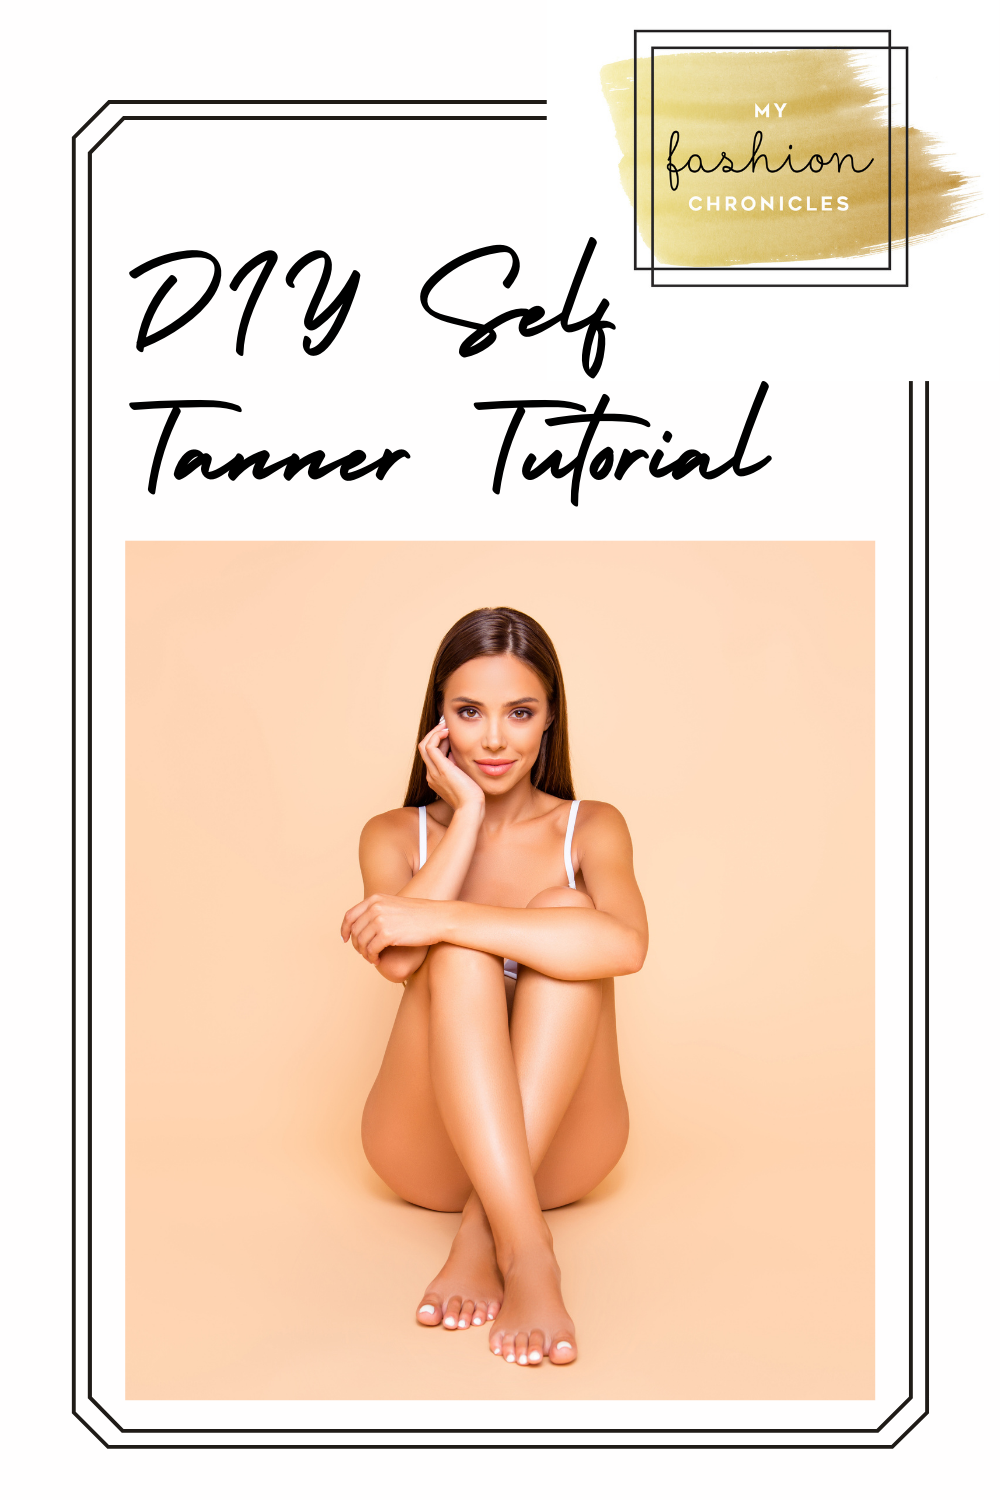 Myfashionchronicles.com has tons of fresh ideas for looking great all the time! Who doesn't love the glow of a nice tan? Save money and get the same awesome results with this homemade self tanner!